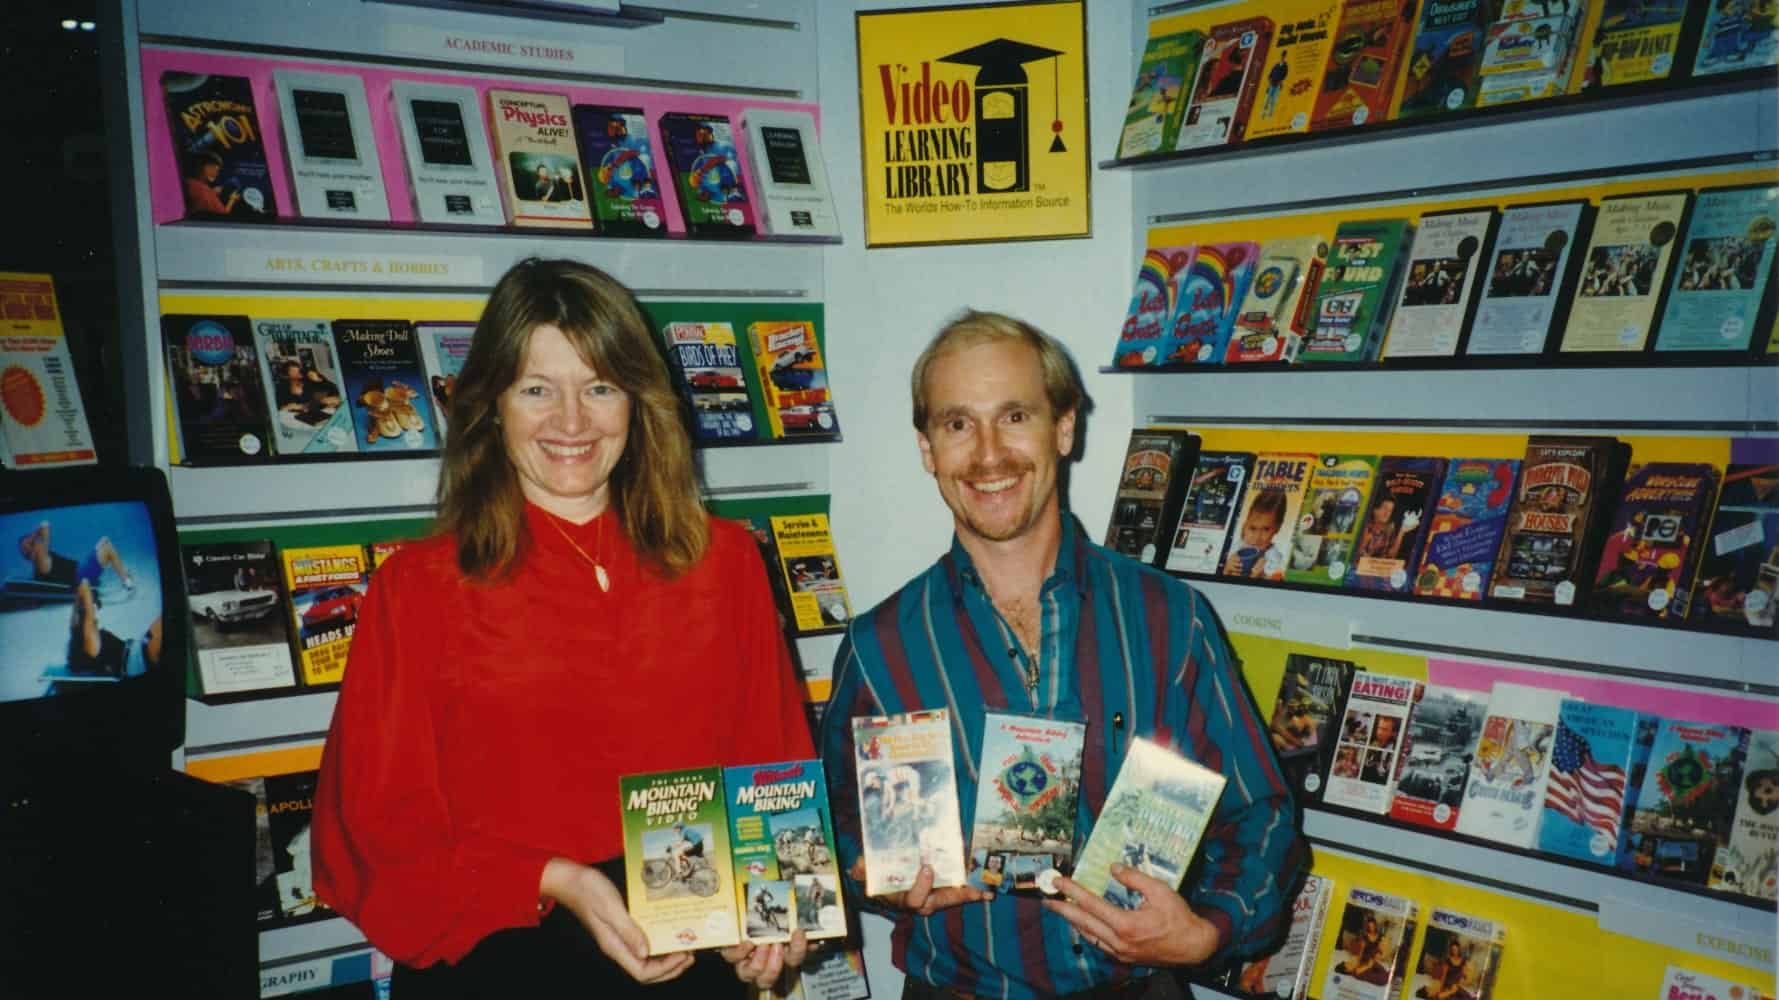 Video Duo Patty Mooney and Mark Schulze Sell VHS Tapes at VSDA Show in Las Vegas 1997